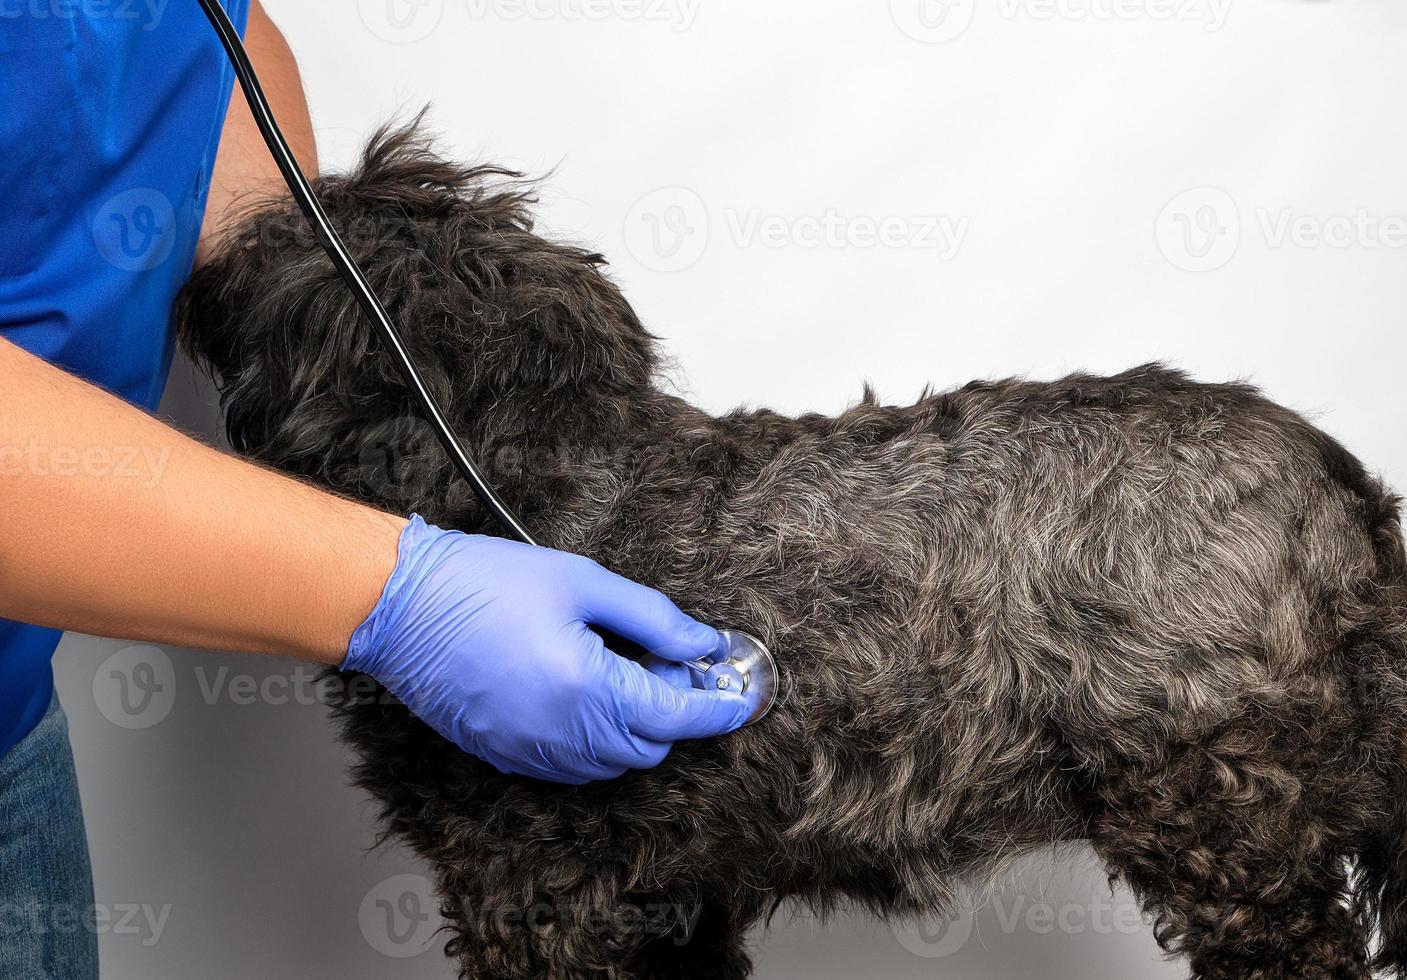 veterinarian in a blue uniform bugs the heartbeat of a black fluffy dog photo